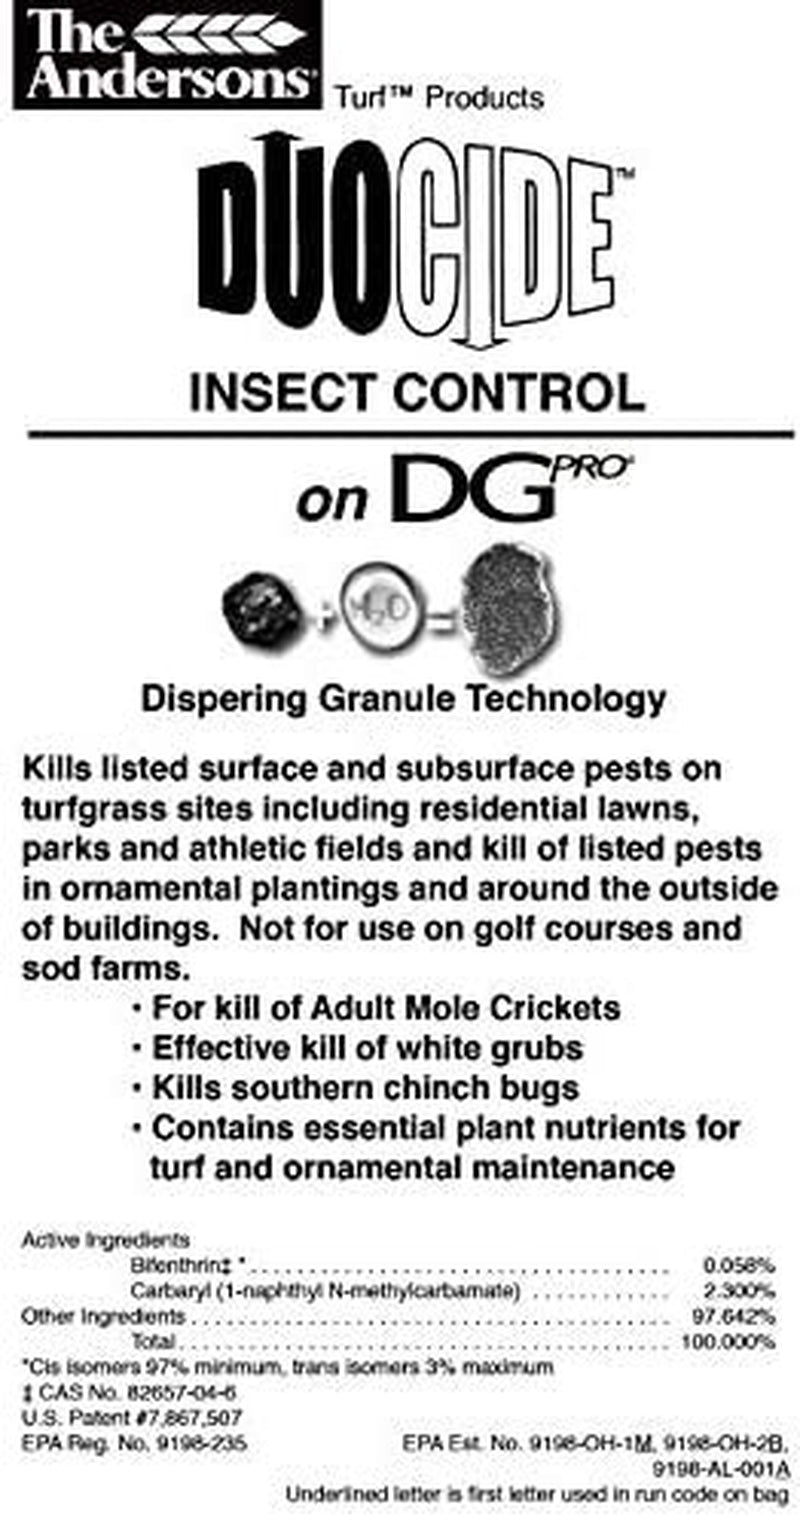 The Andersons Duocide Professional-Grade Lawn Insect Control - Covers up to 4,500 Sq Ft (18 Lb)